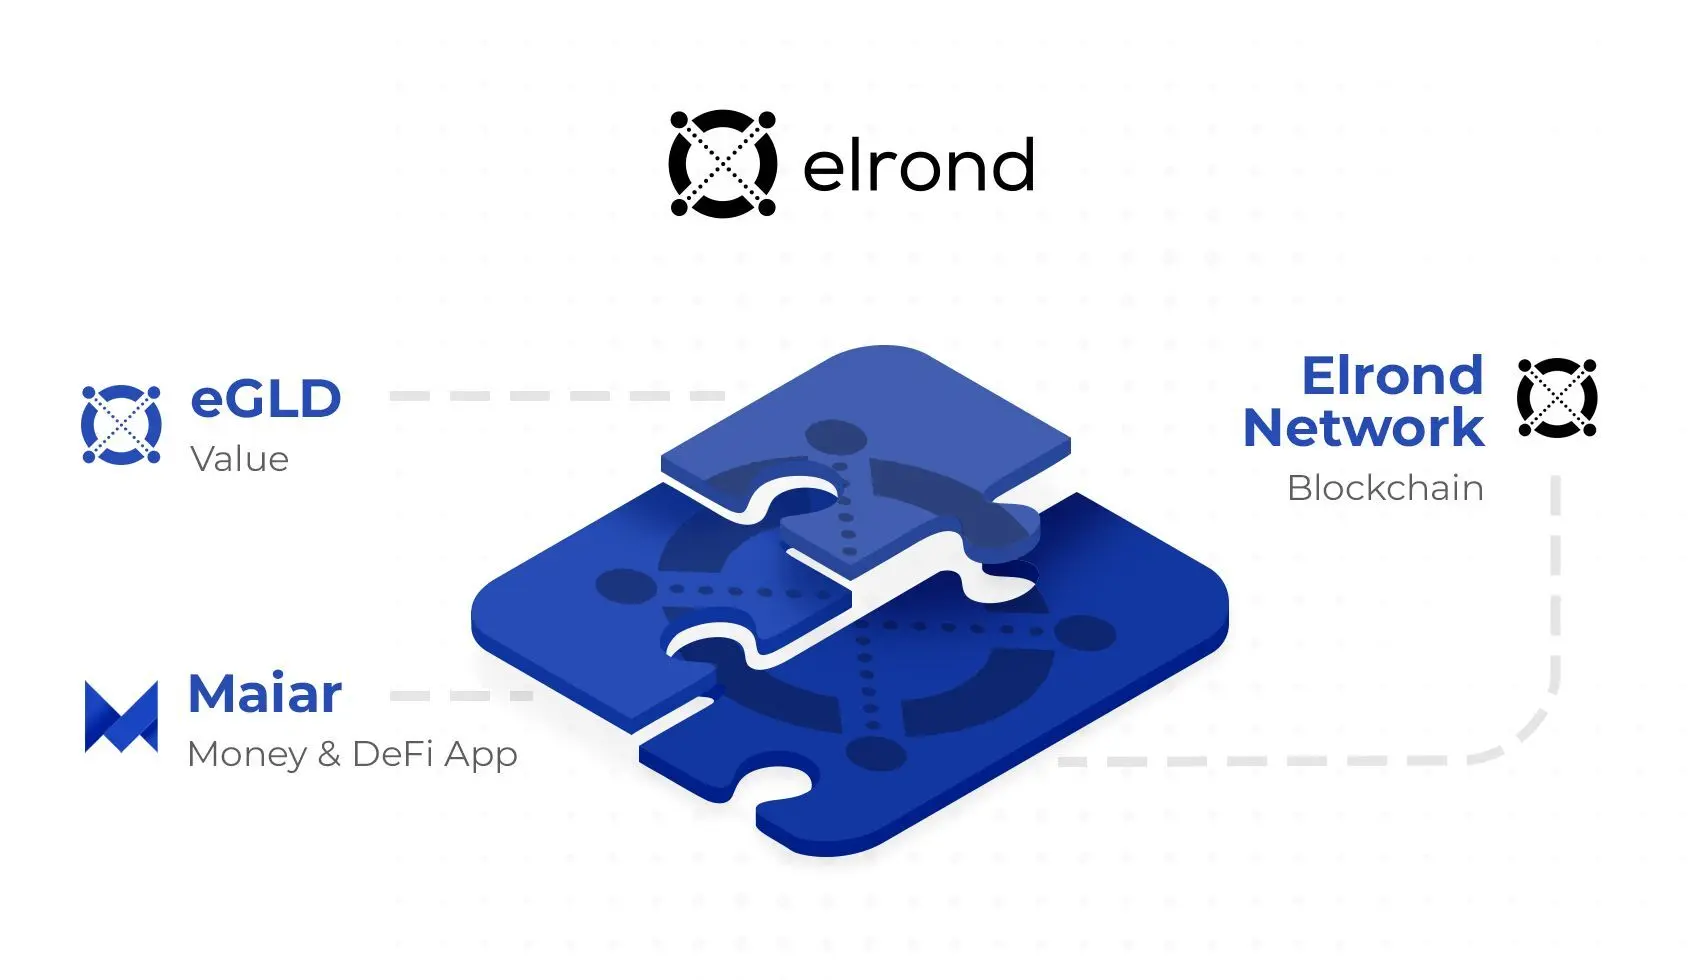 Elrond architecture presented as a jigsaw puzzle: parts labeled as Elrond Blockchain, eGLD and Maiar